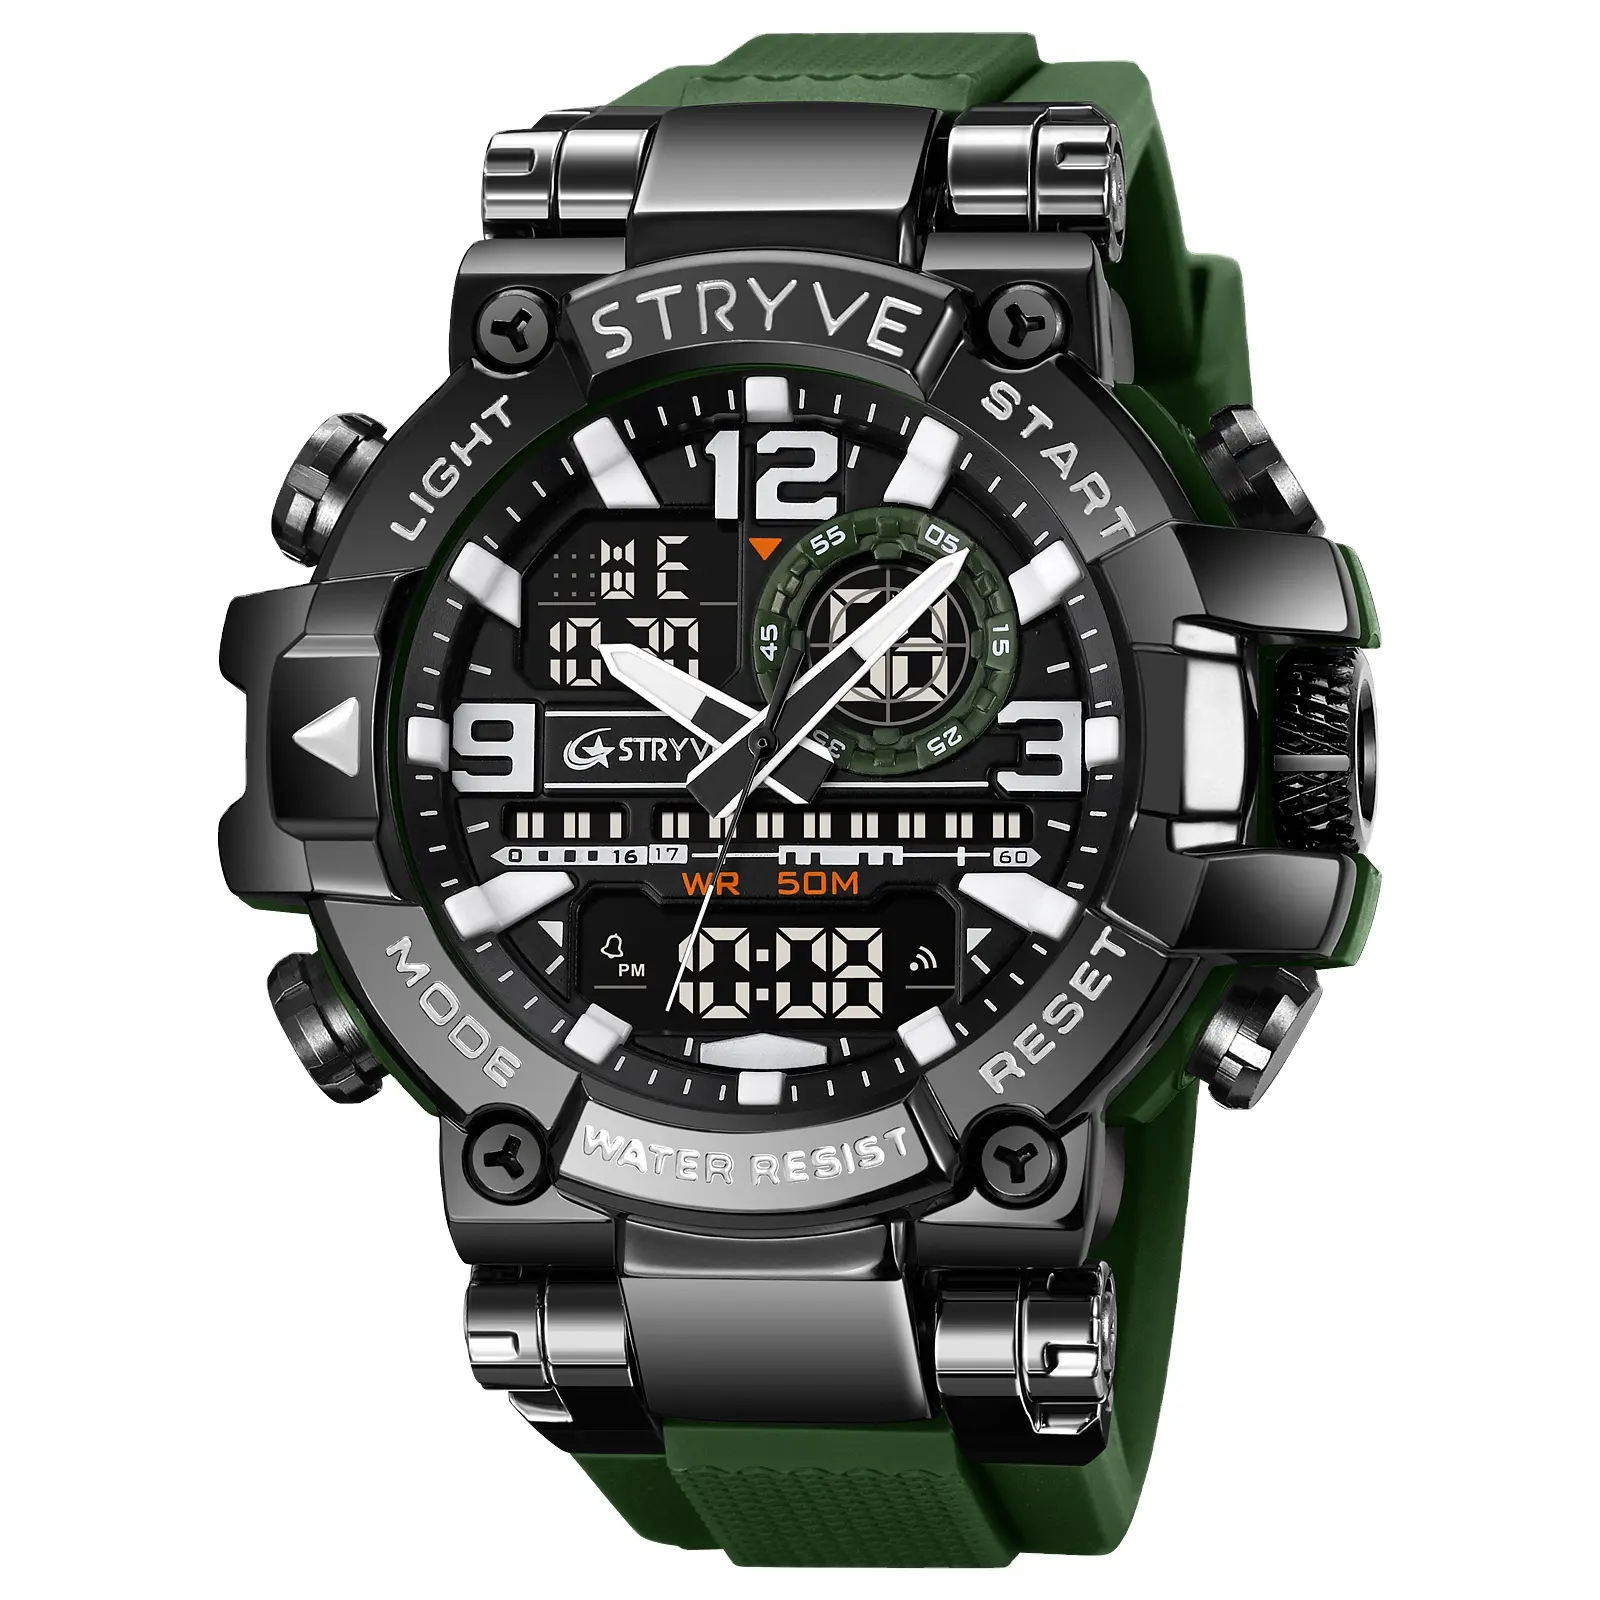 STRYVE new casual sport luminous waterproof and other multifunctional men's quartz digital tactical watches